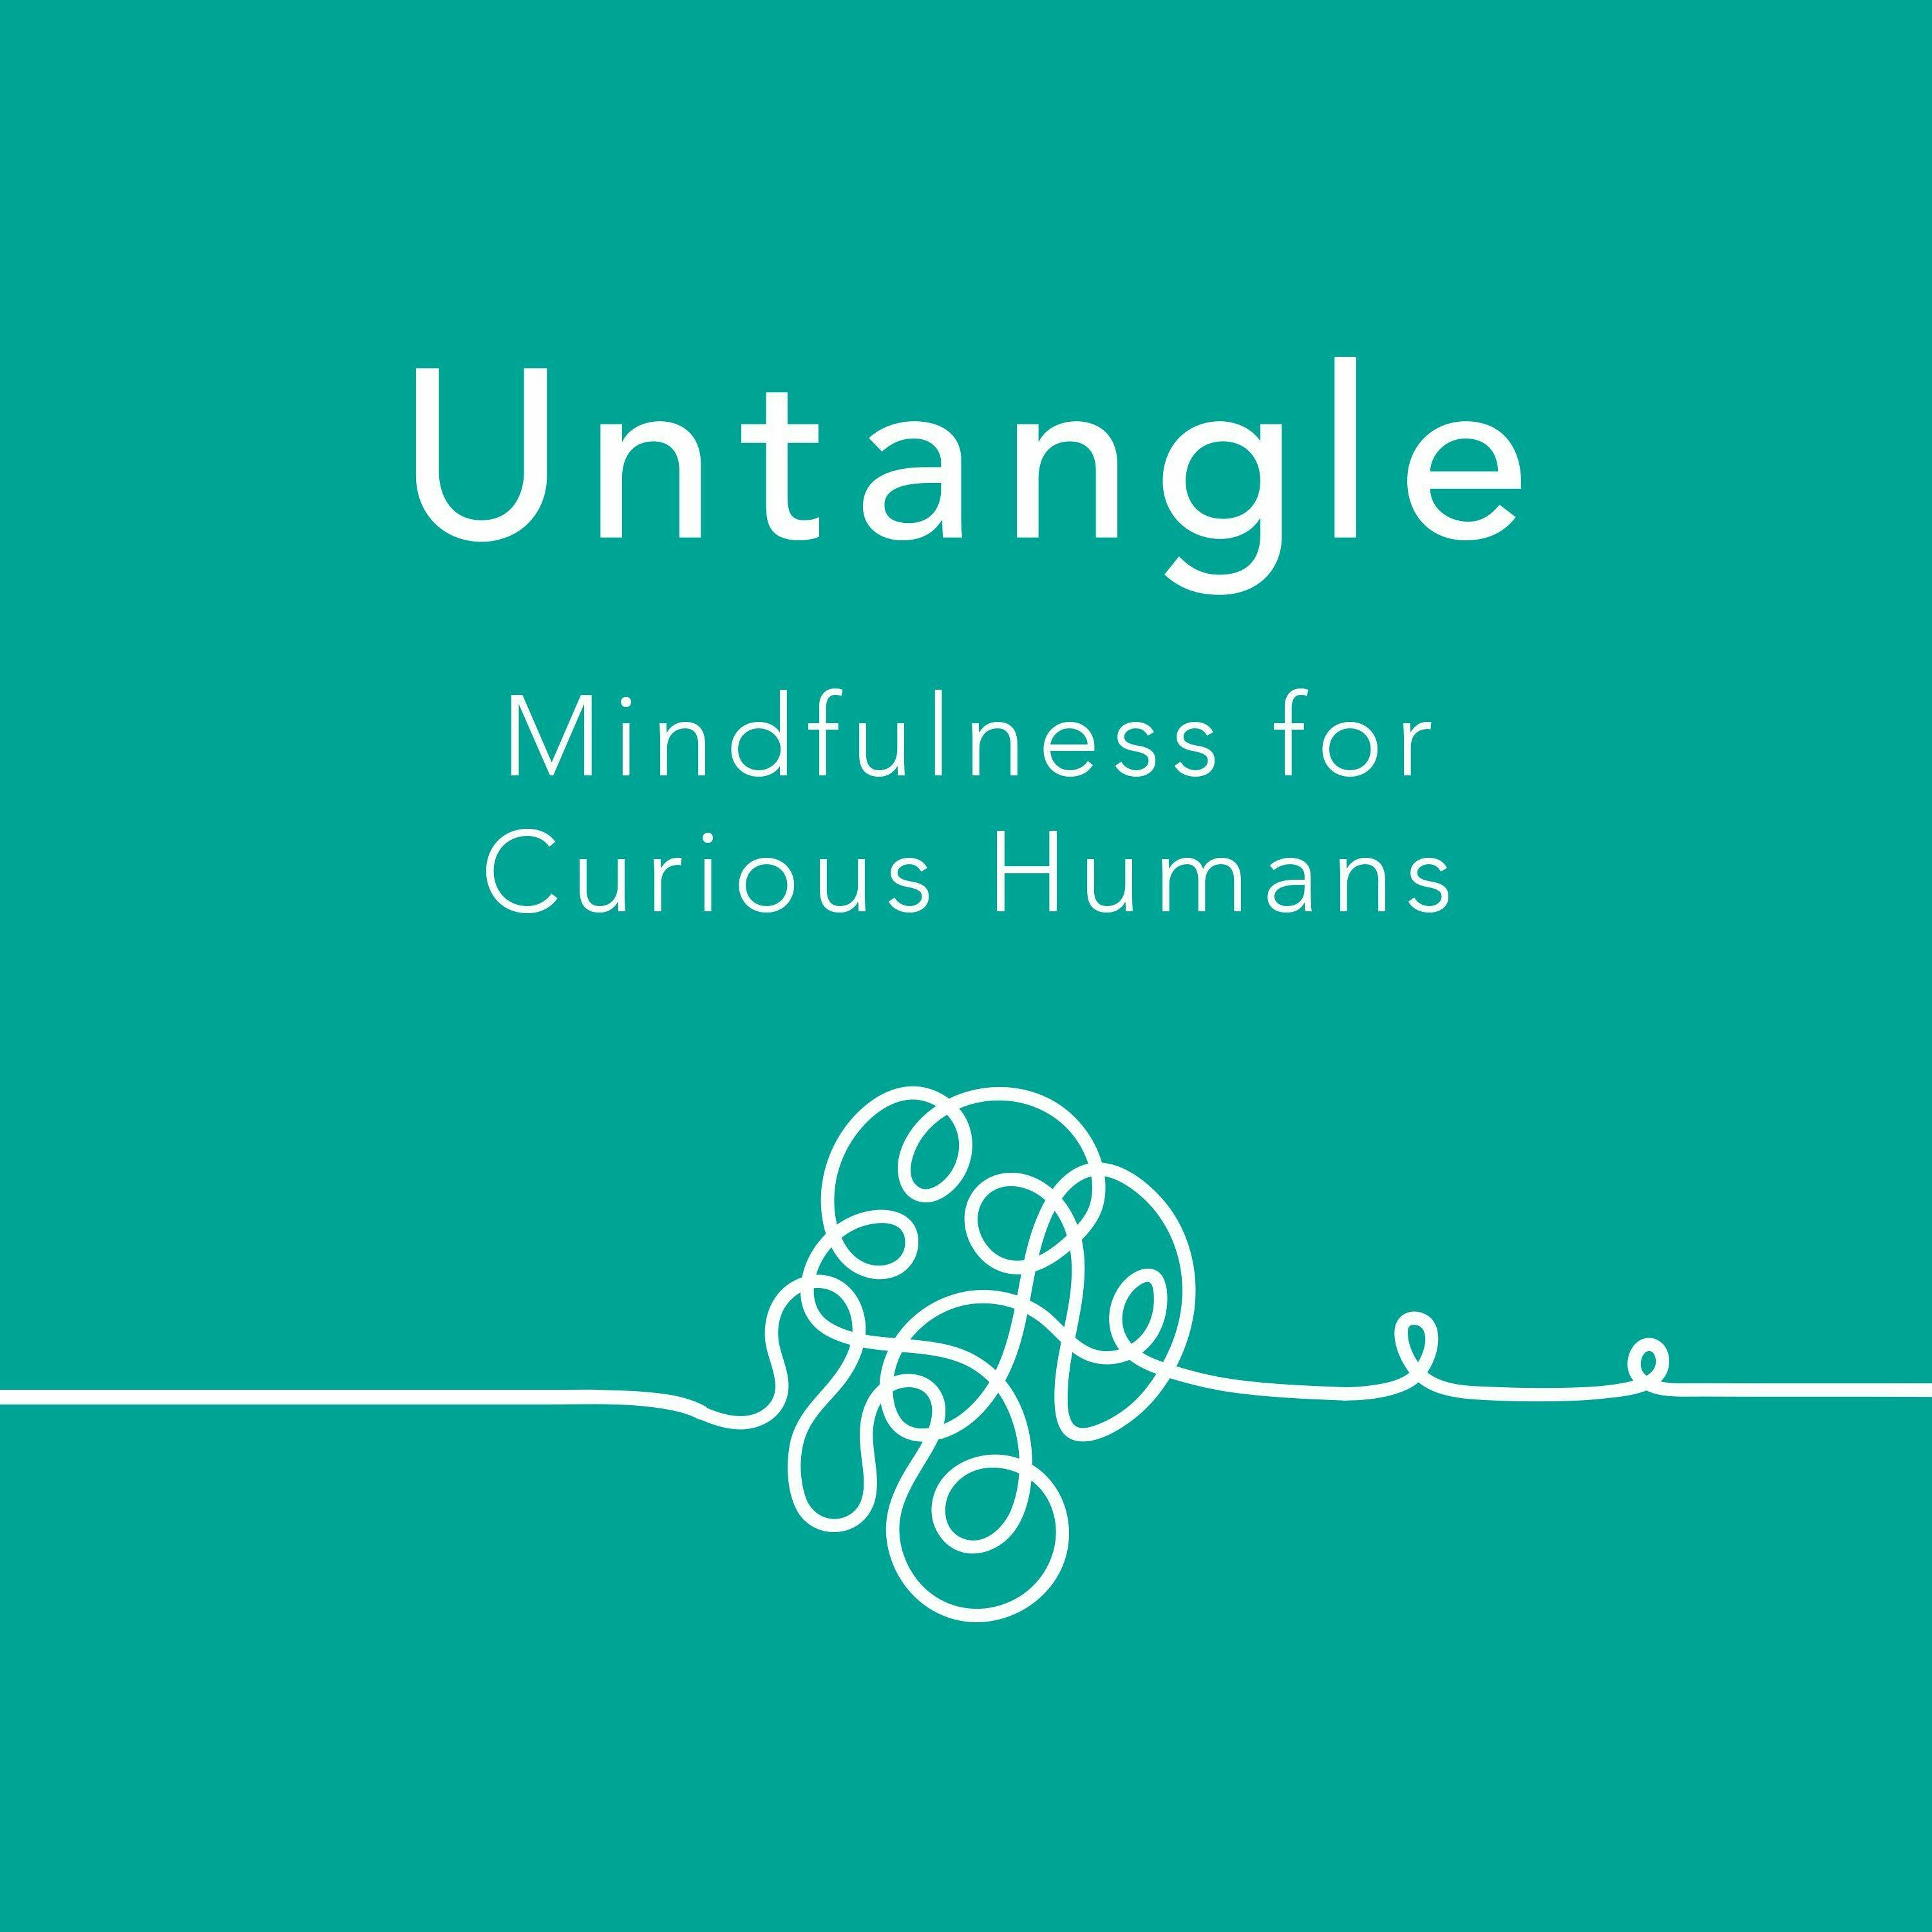 Patricia Karpas - The Untangle 2020 Top Five and a Meditation to Welcome 2021